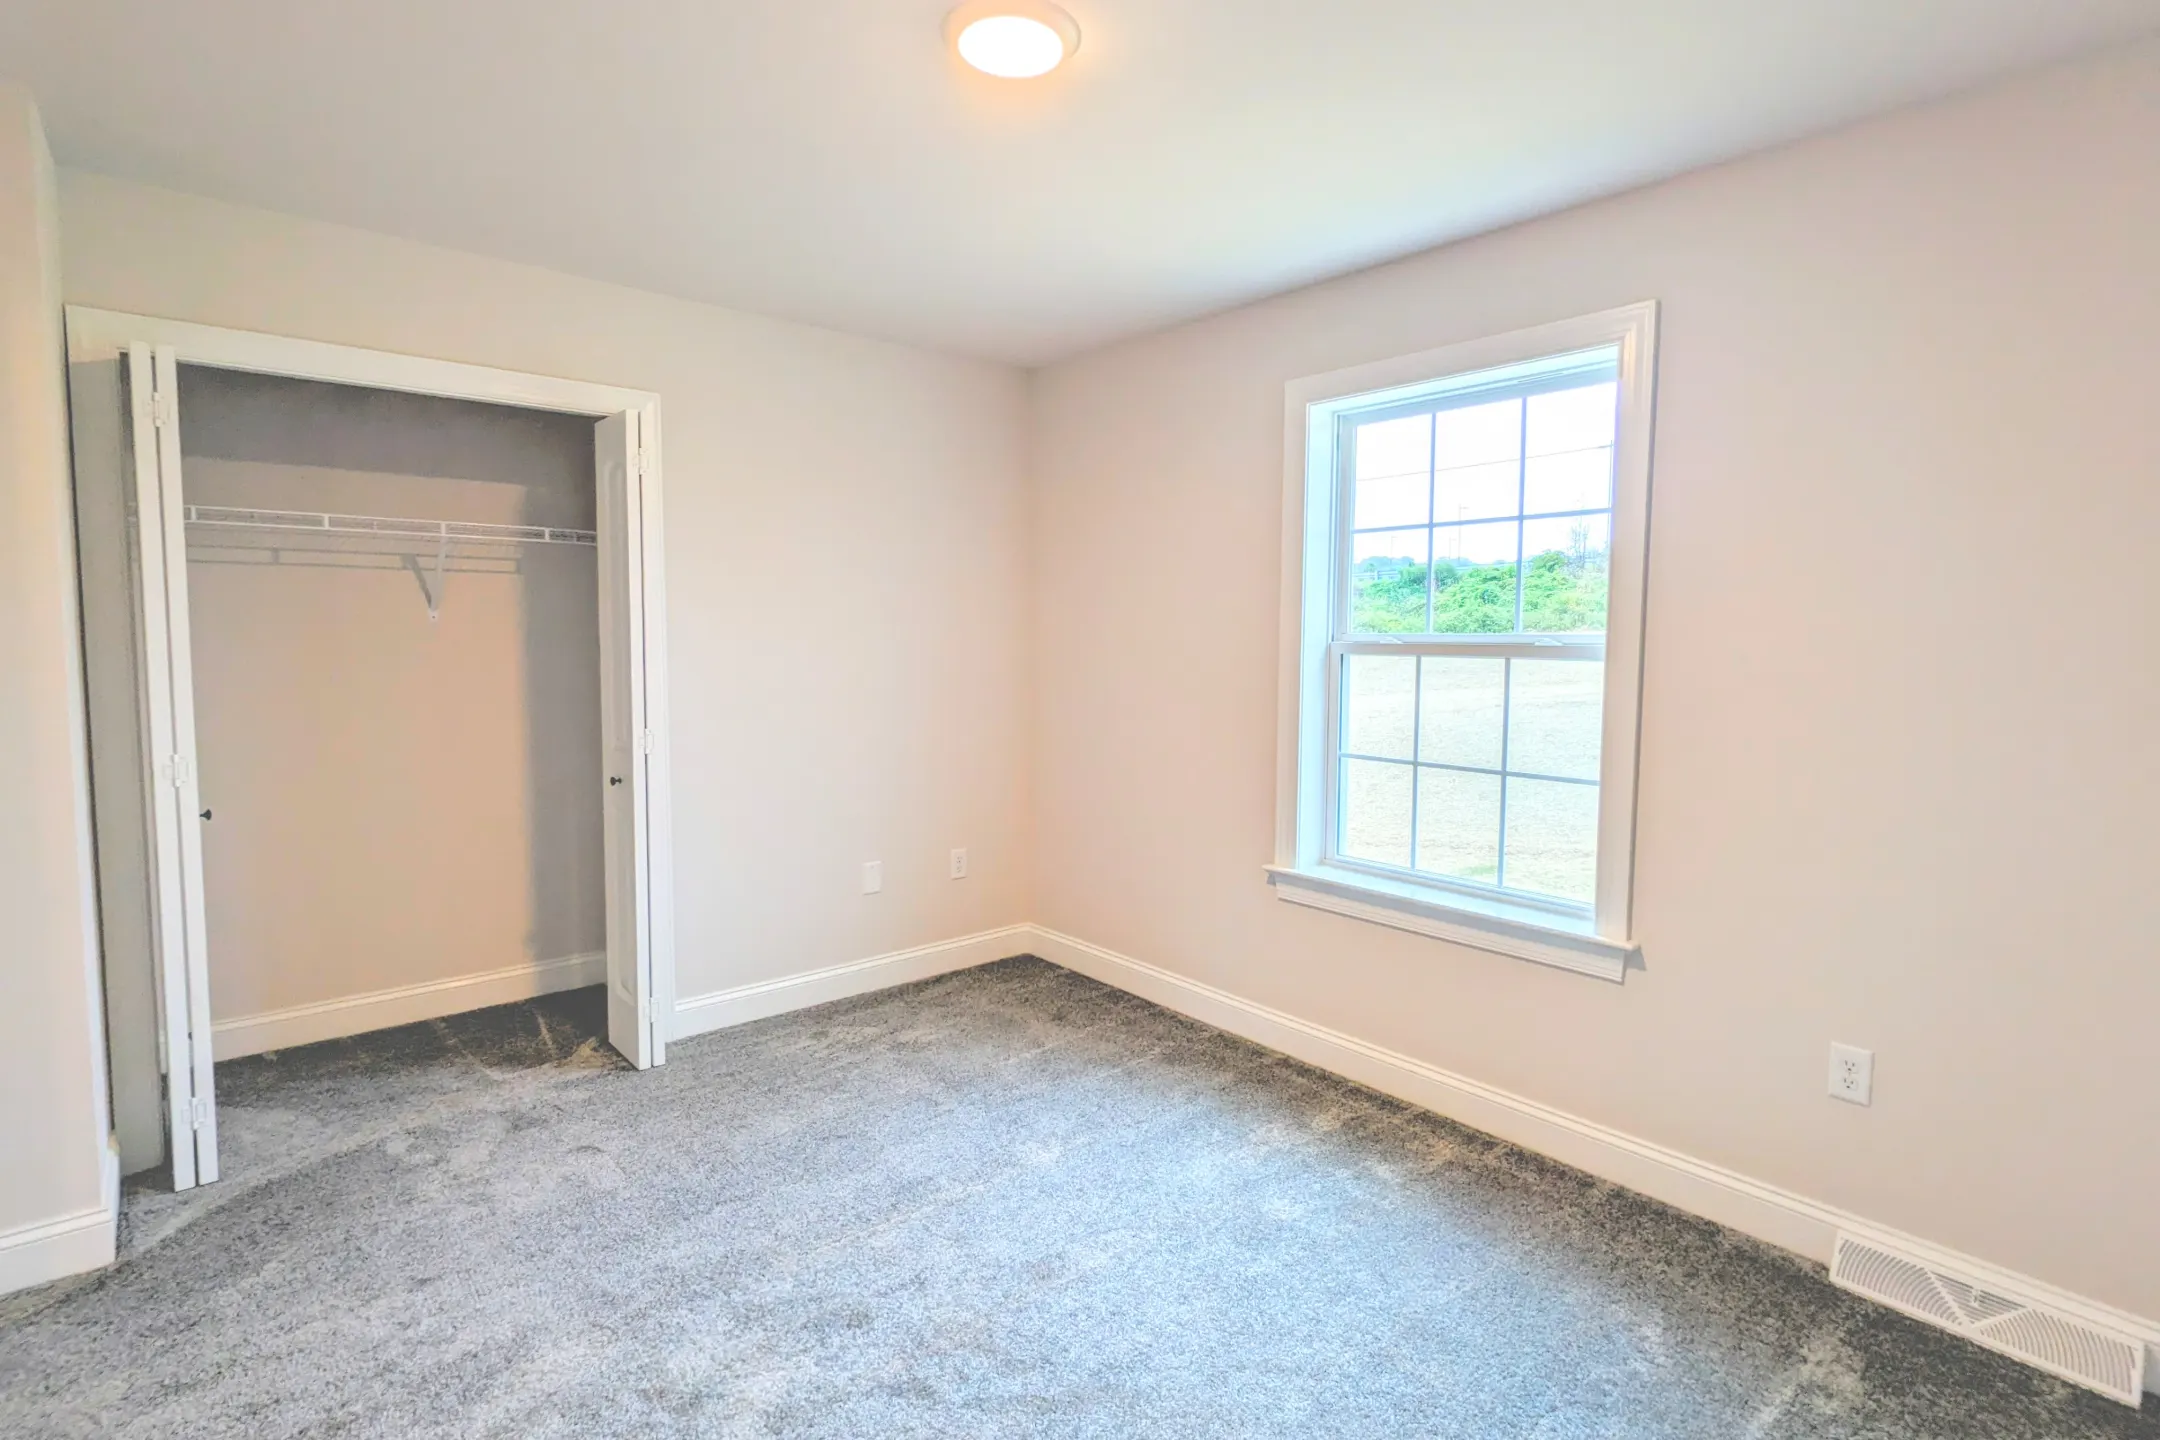 Bedroom - River Ridge Townhomes - Wrightsville, PA